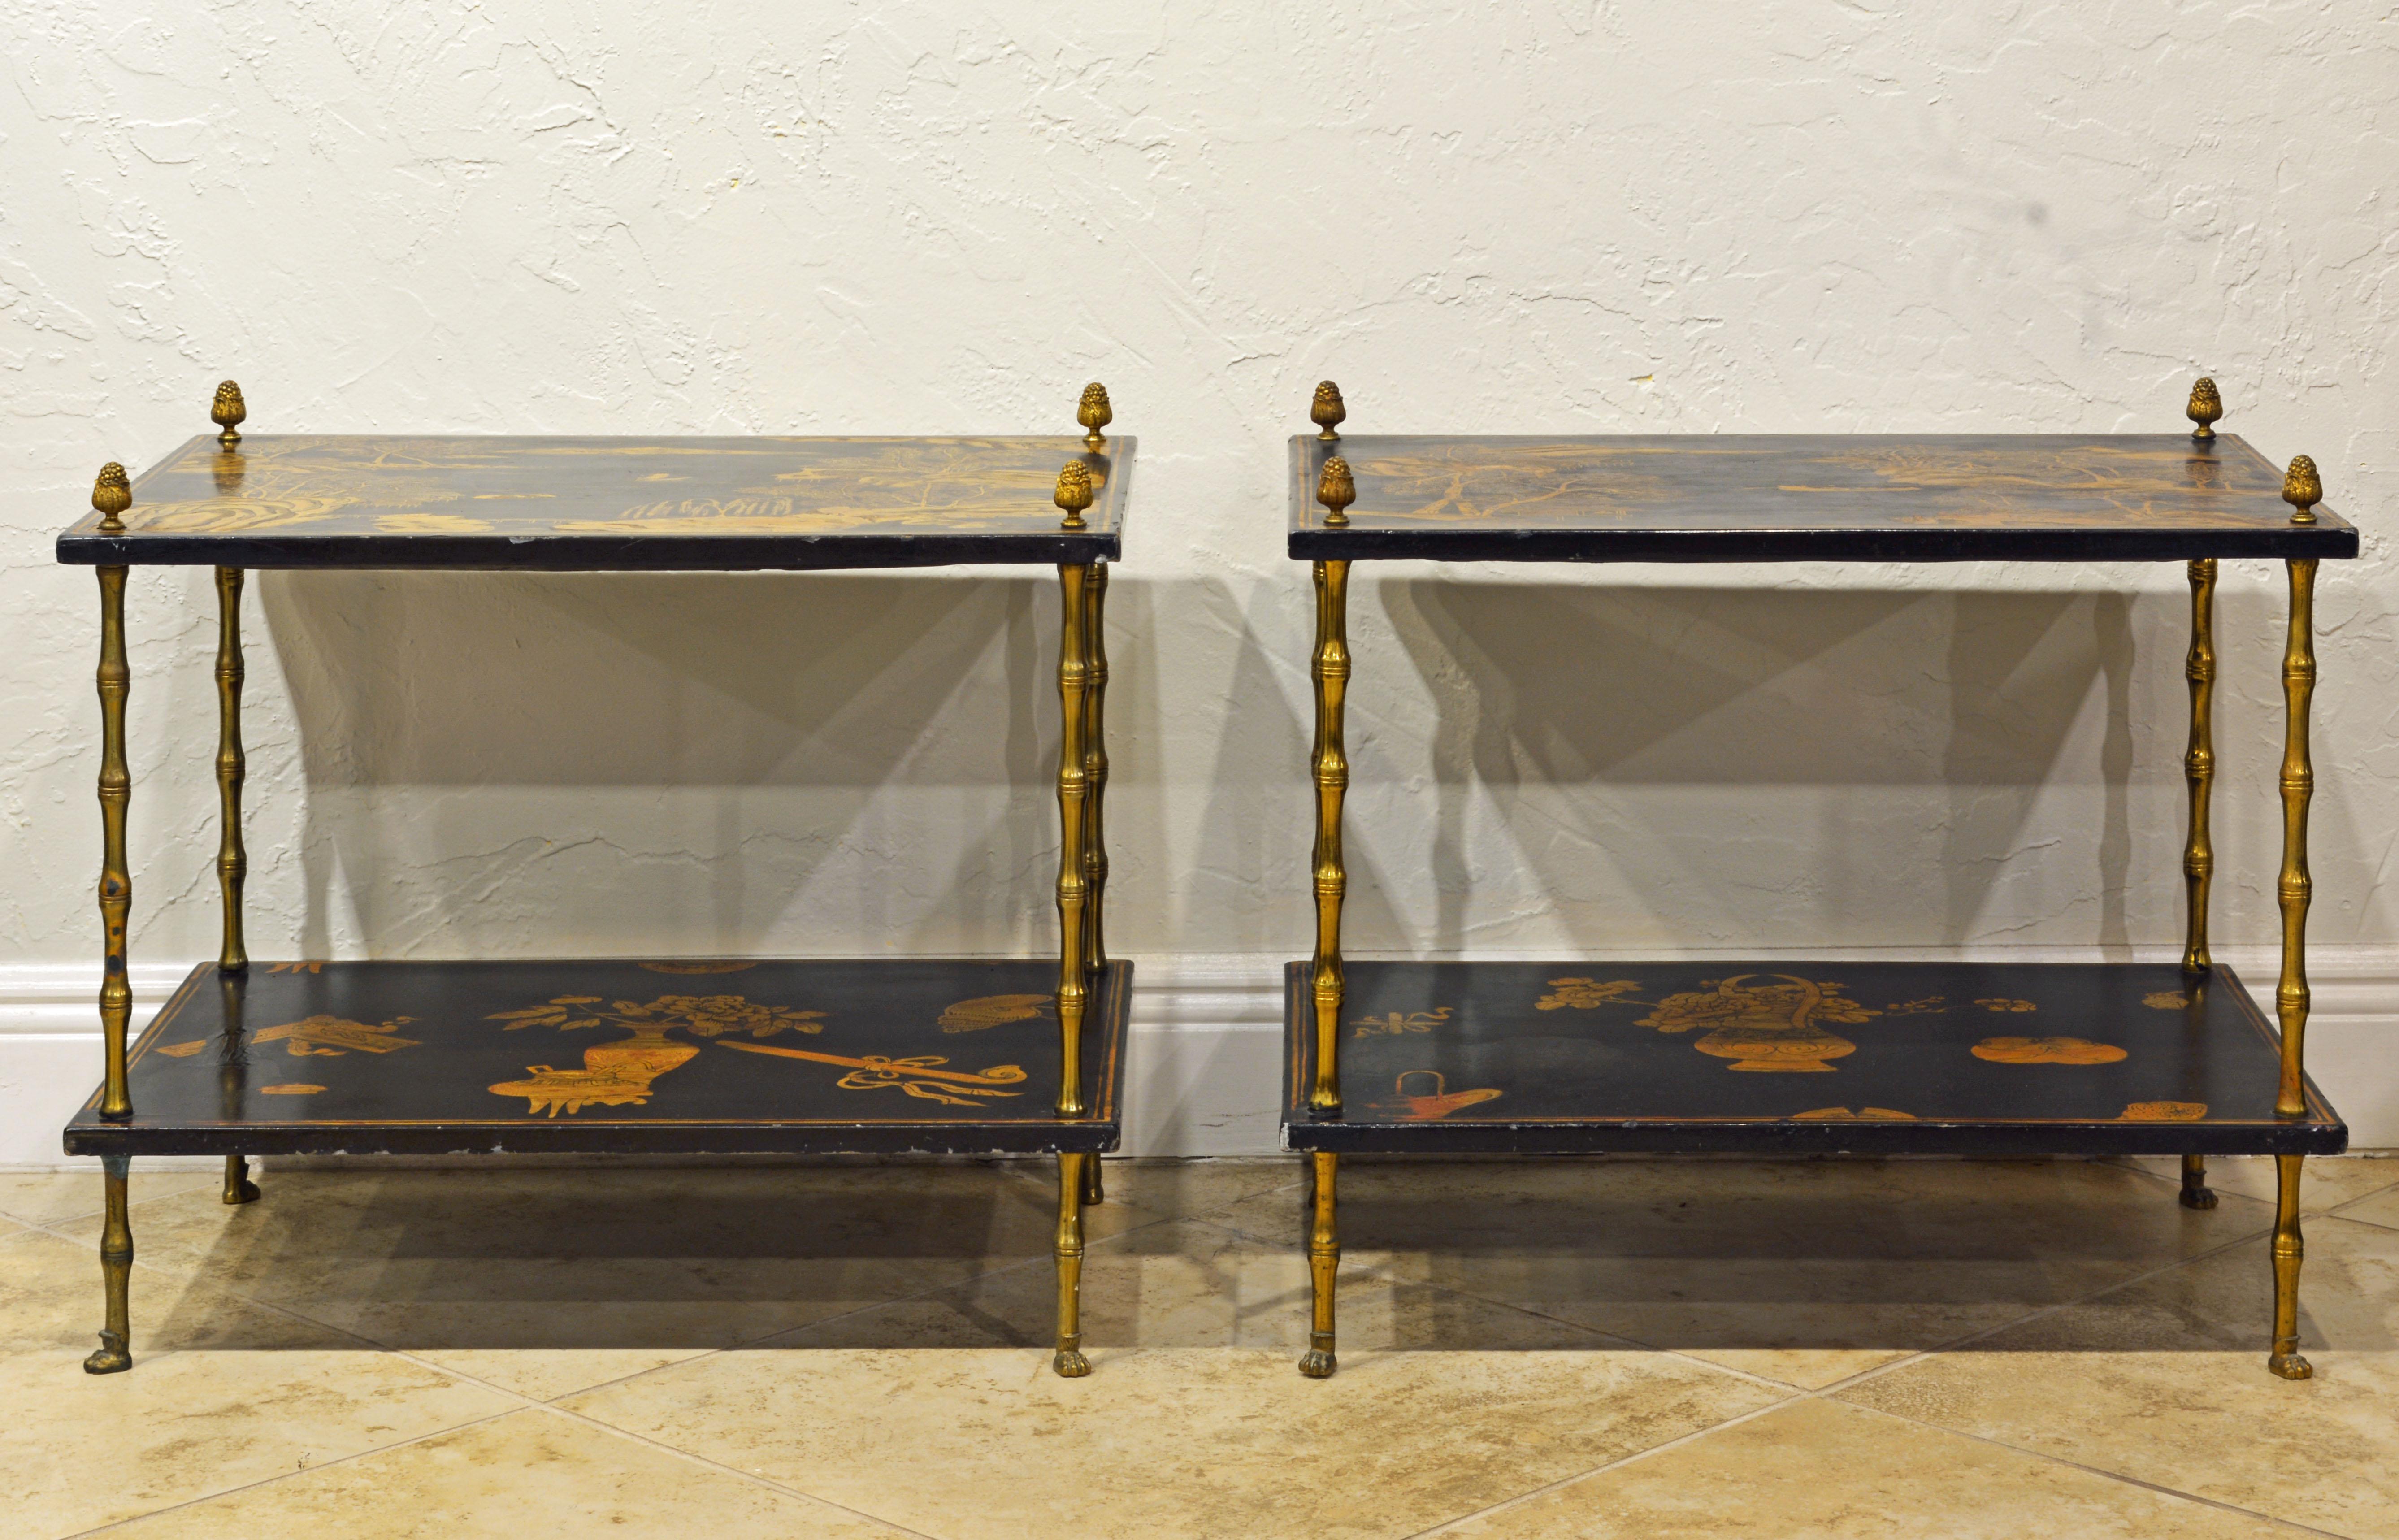 This fine pair of English Aesthetic Movement side tables in the Chinese taste date to the late 19th century and feature gilt decorated ebonized tops and lower shelves supported by faux bamboo brass legs topped by acorn finials and resting on paw